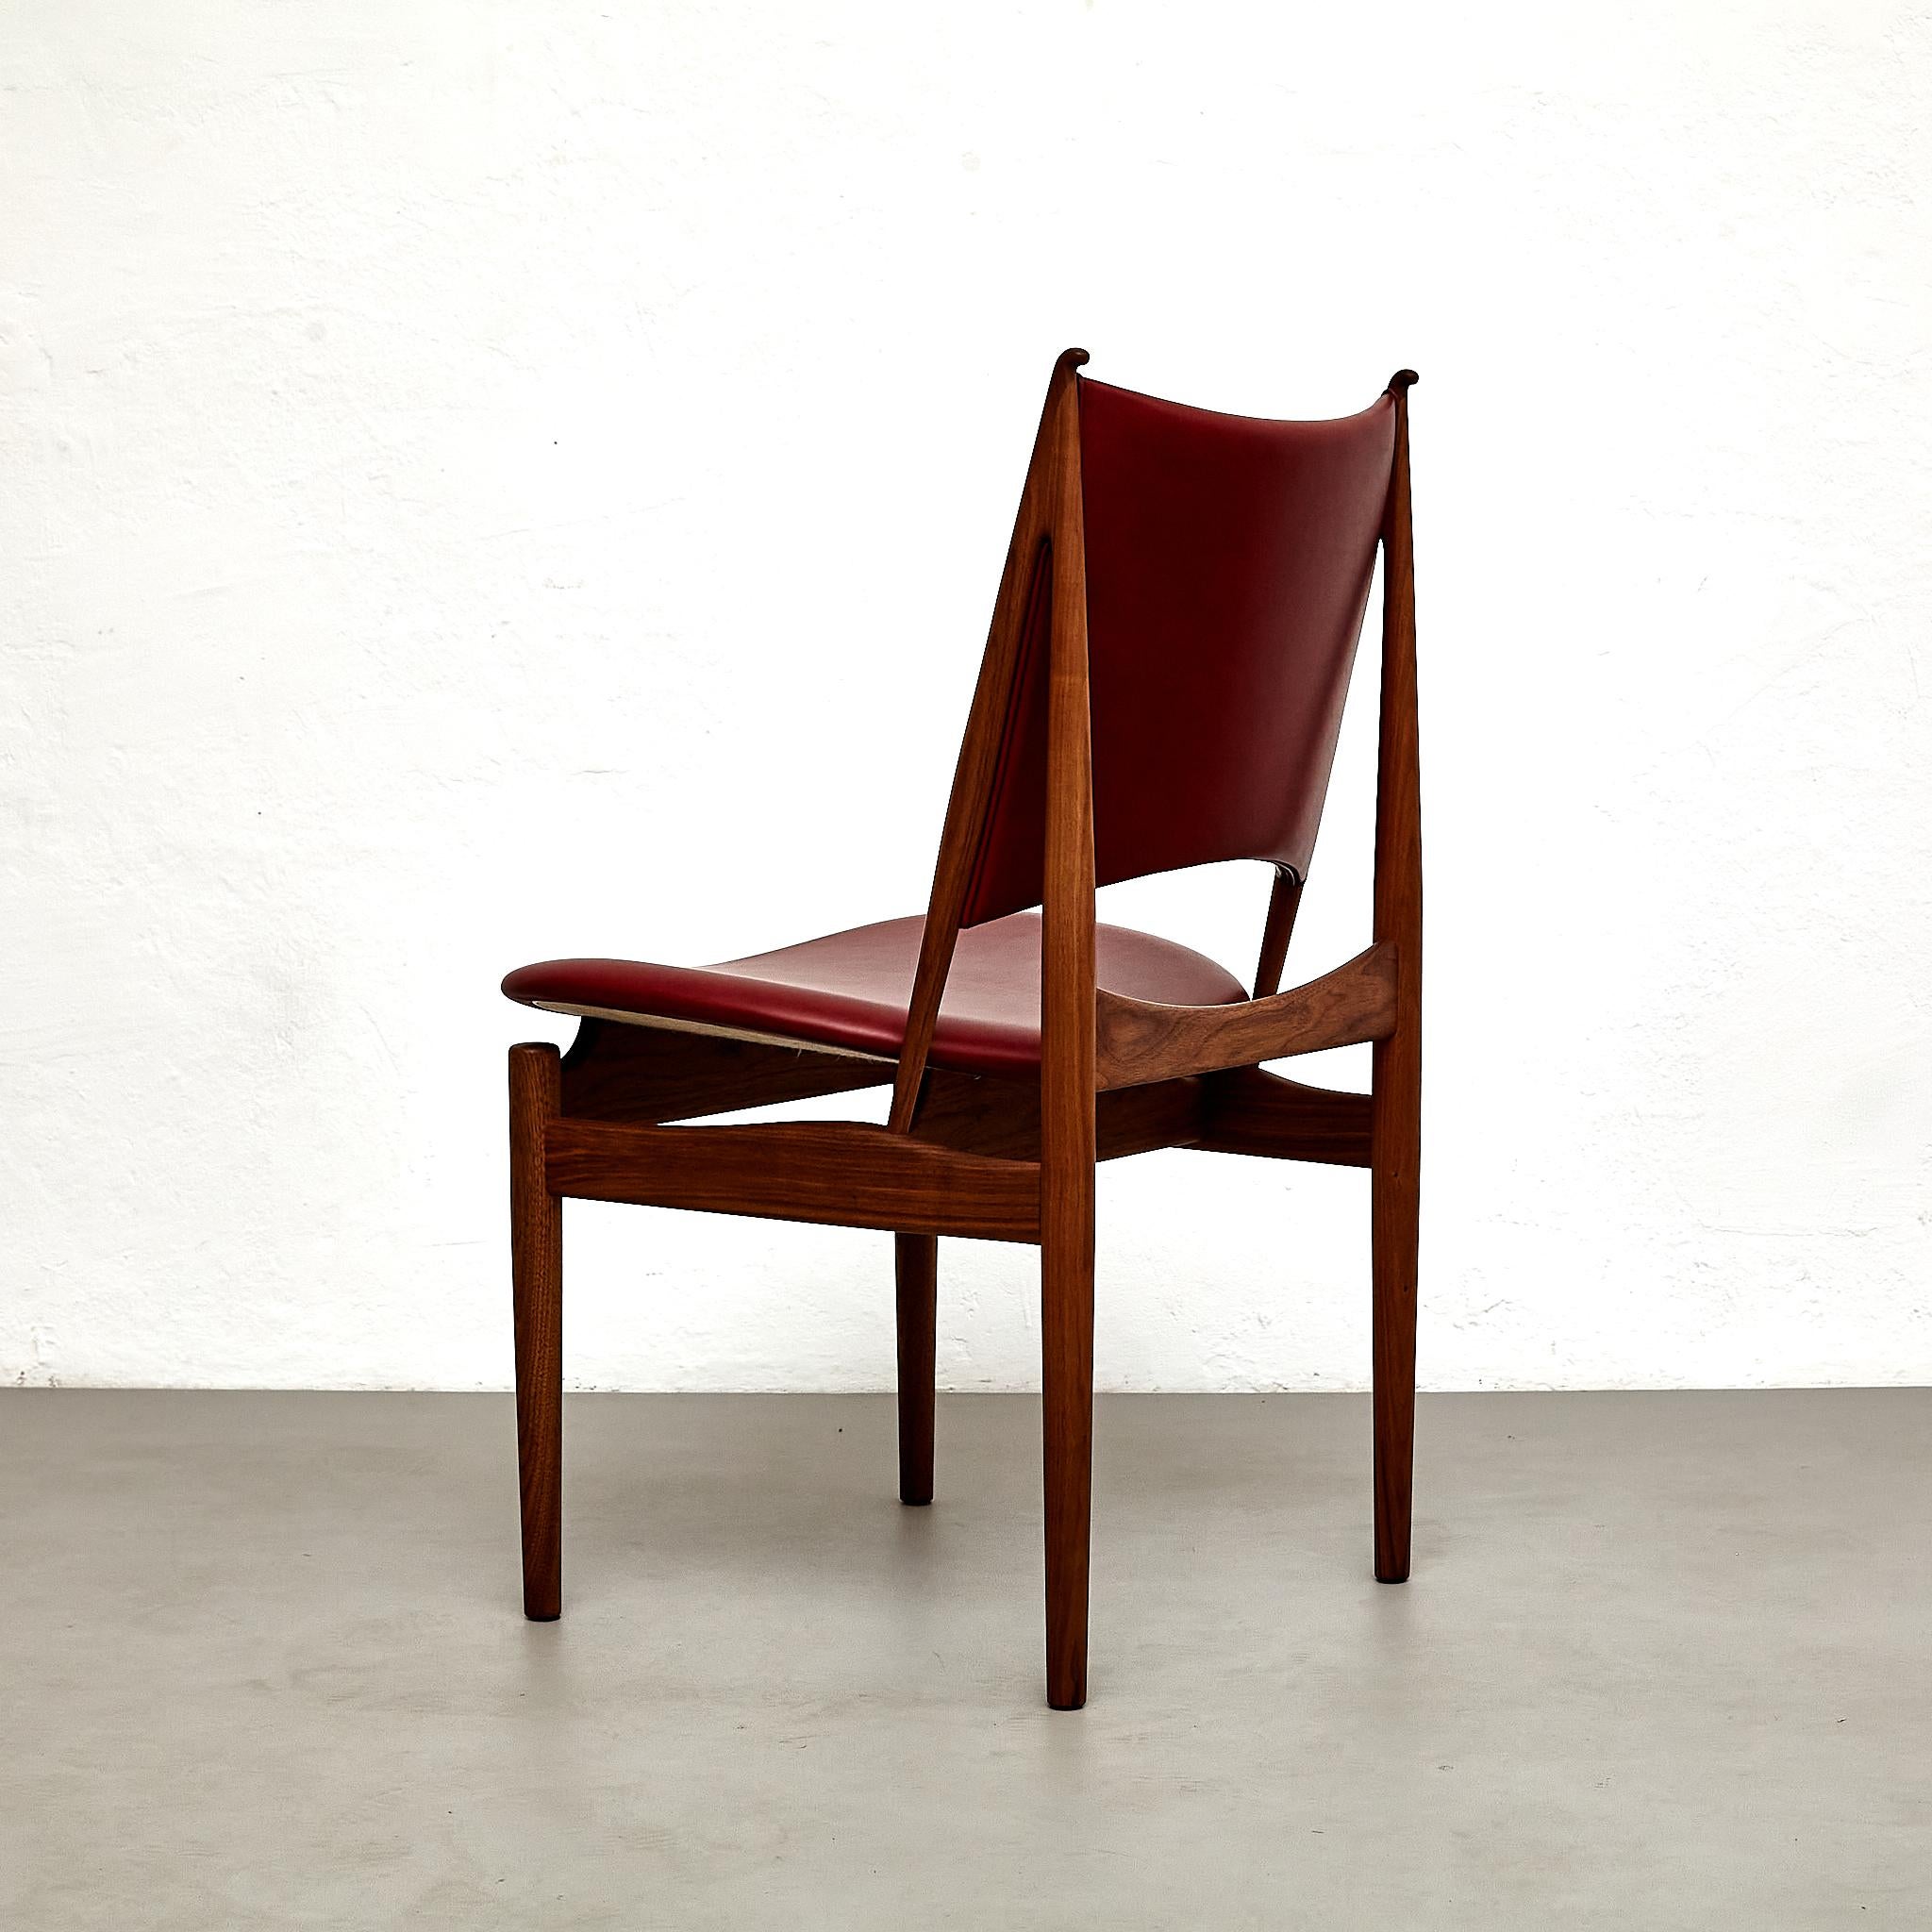 Finn Juhl Egyptian Chair in Walnut Wood and Dark Red Leather For Sale 1